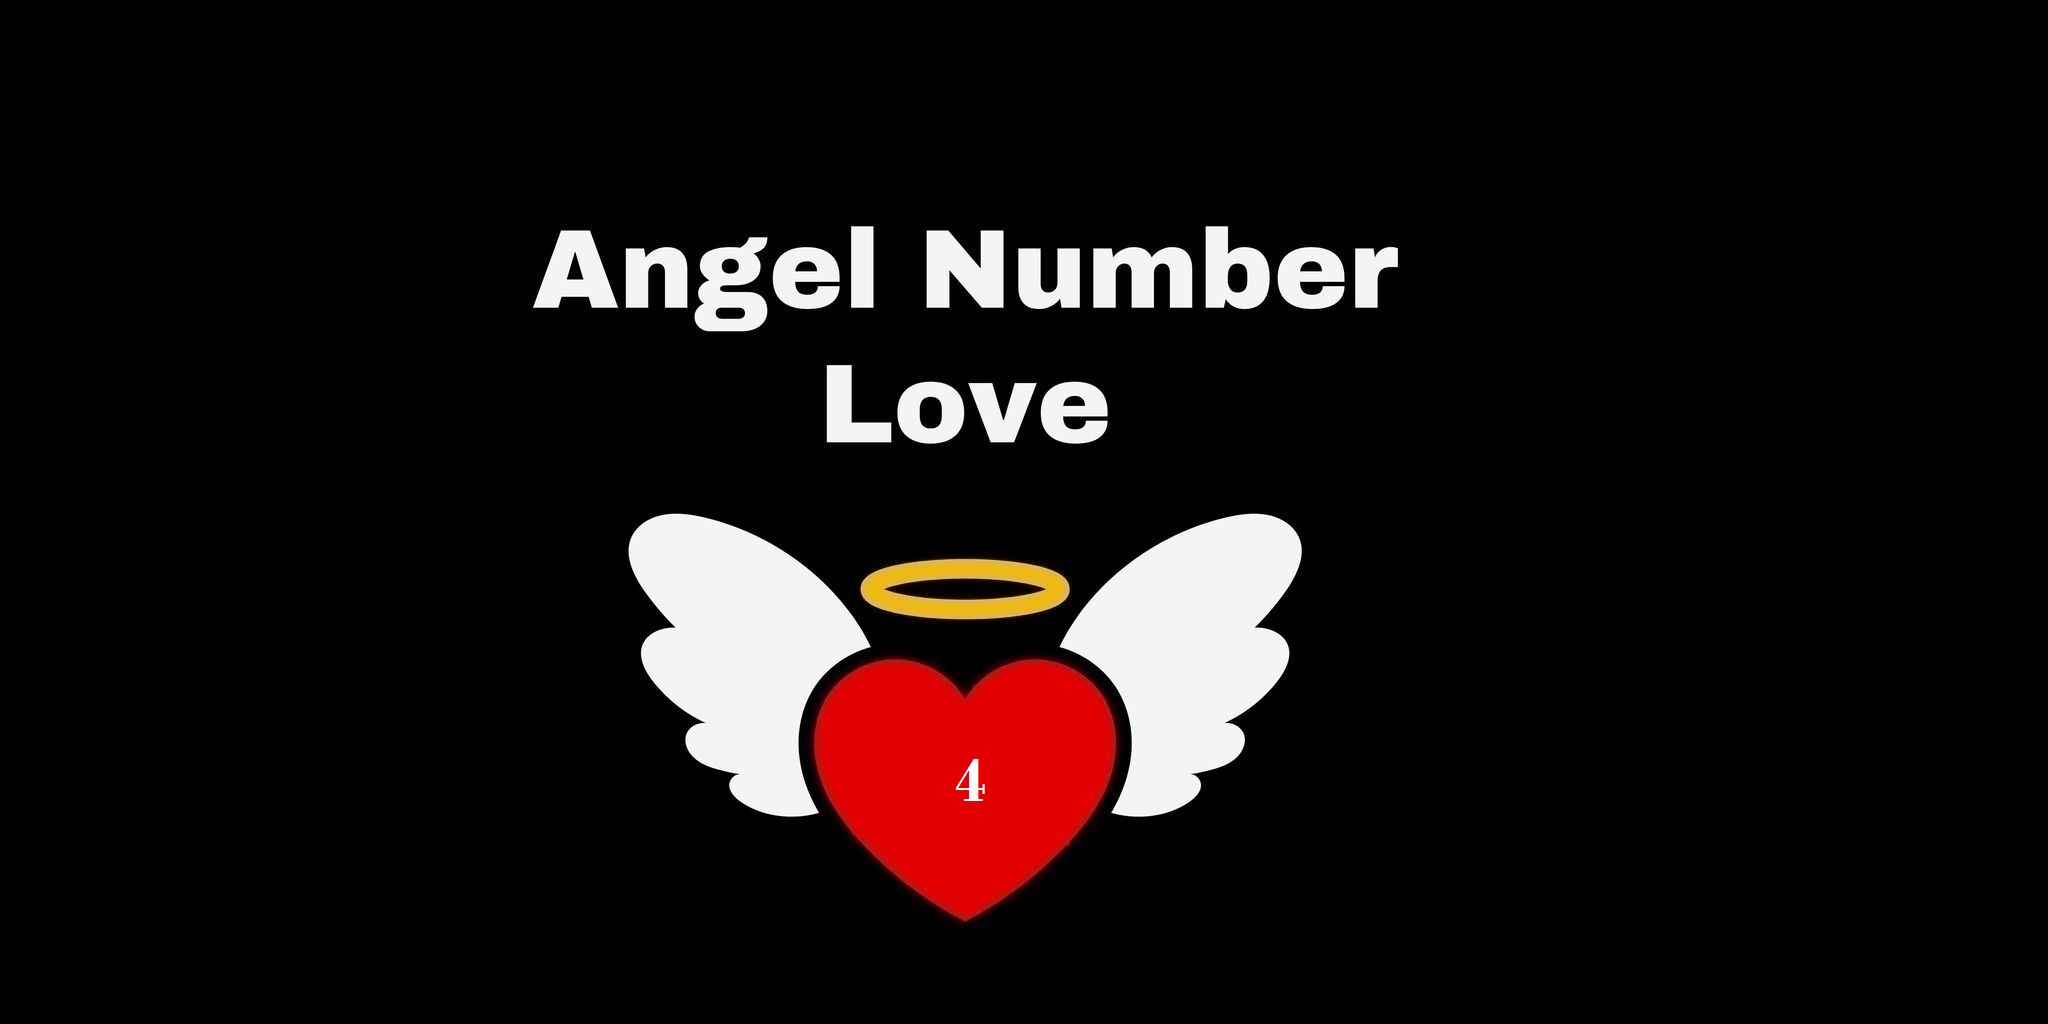 4 Angel Number Meaning In Love